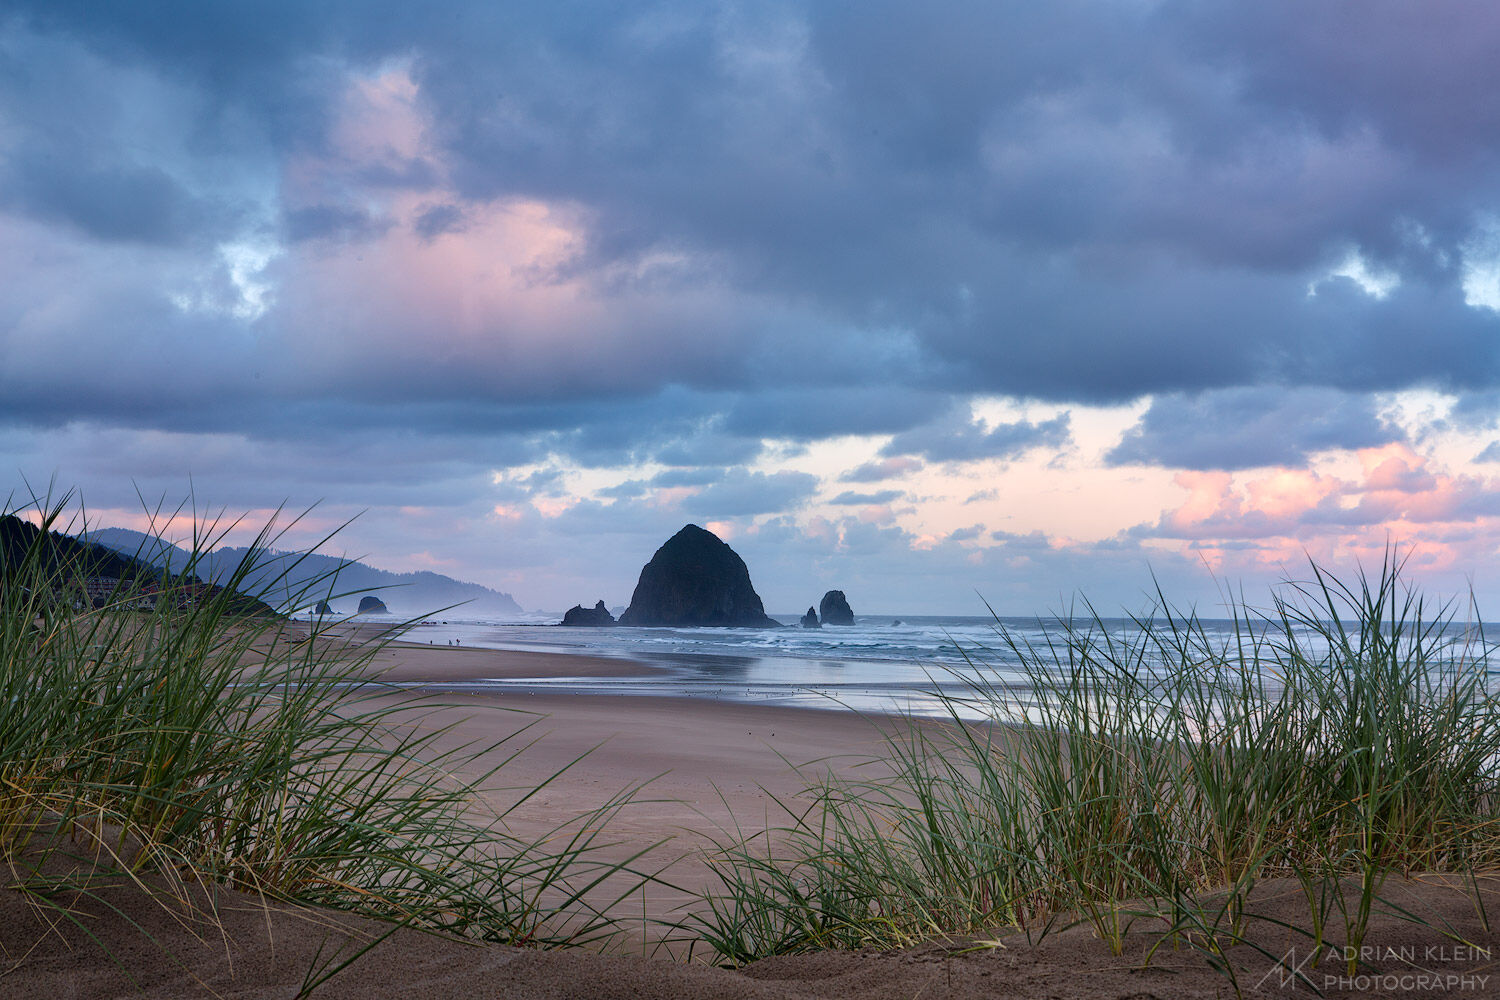 Walking on the dunes this view between grasses shows the morning light and Haystack Rock in Cannon Beach, Oregon.